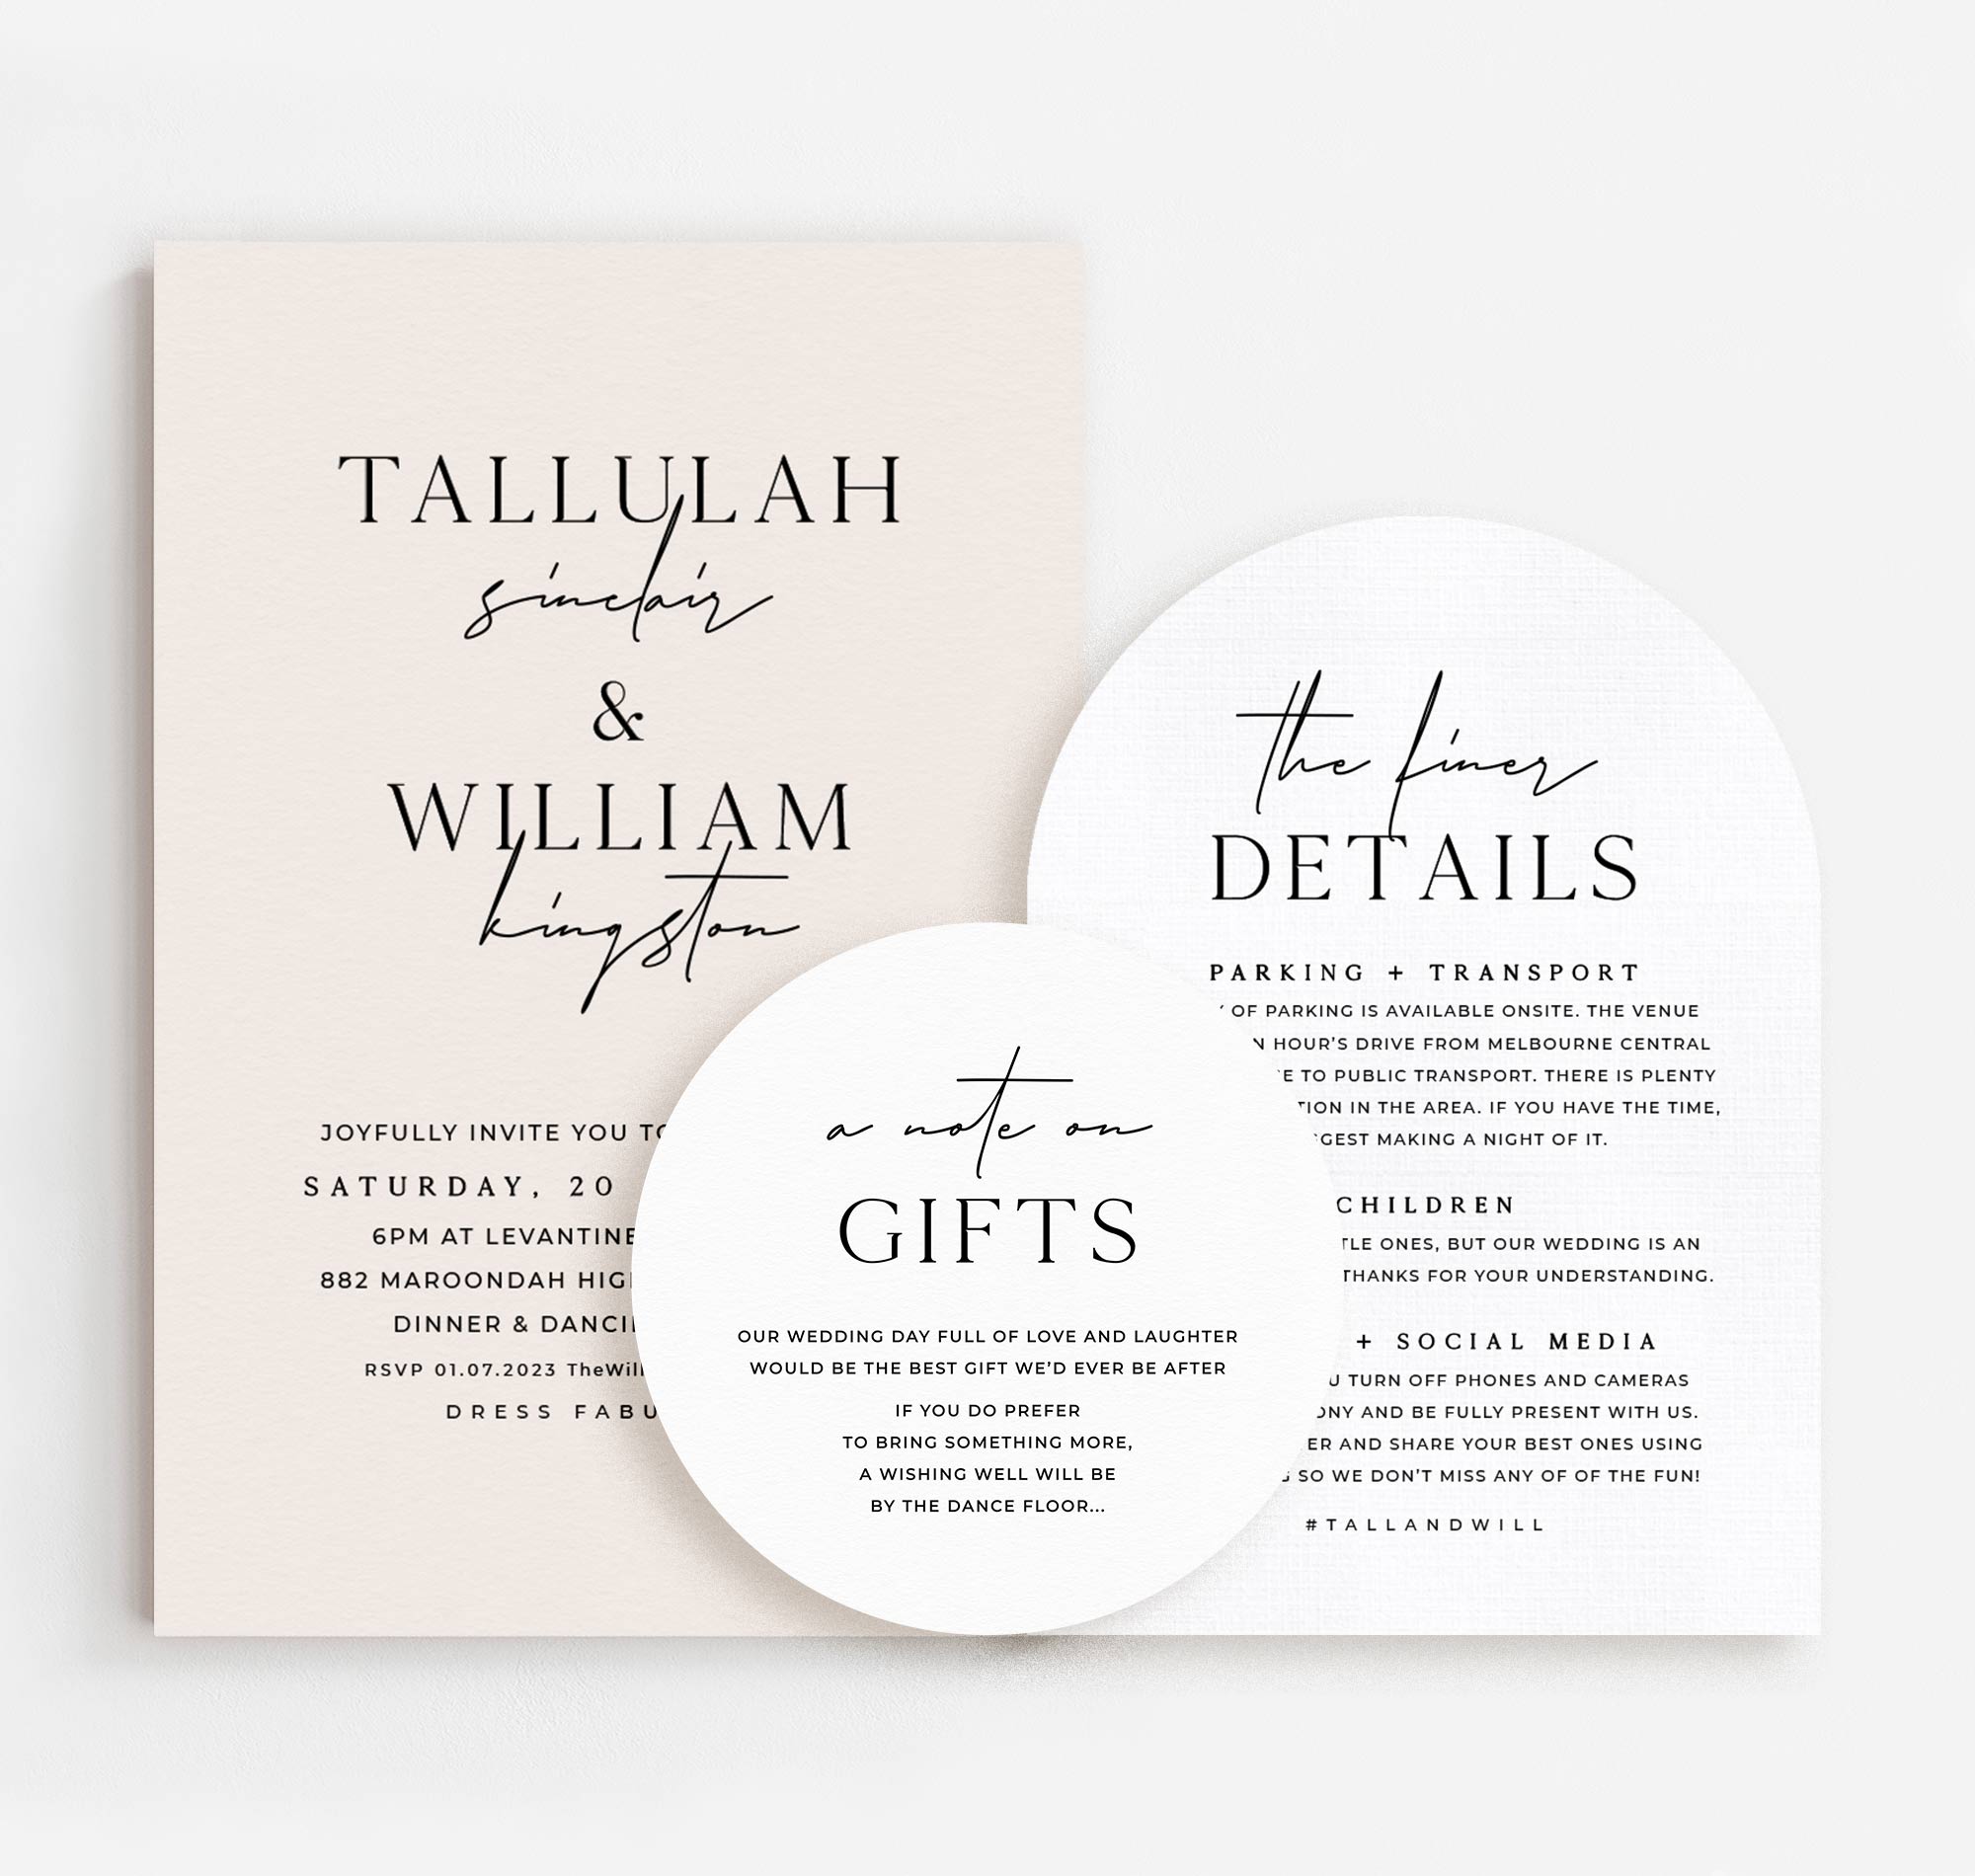 Printed Invitation Package - Happy Union